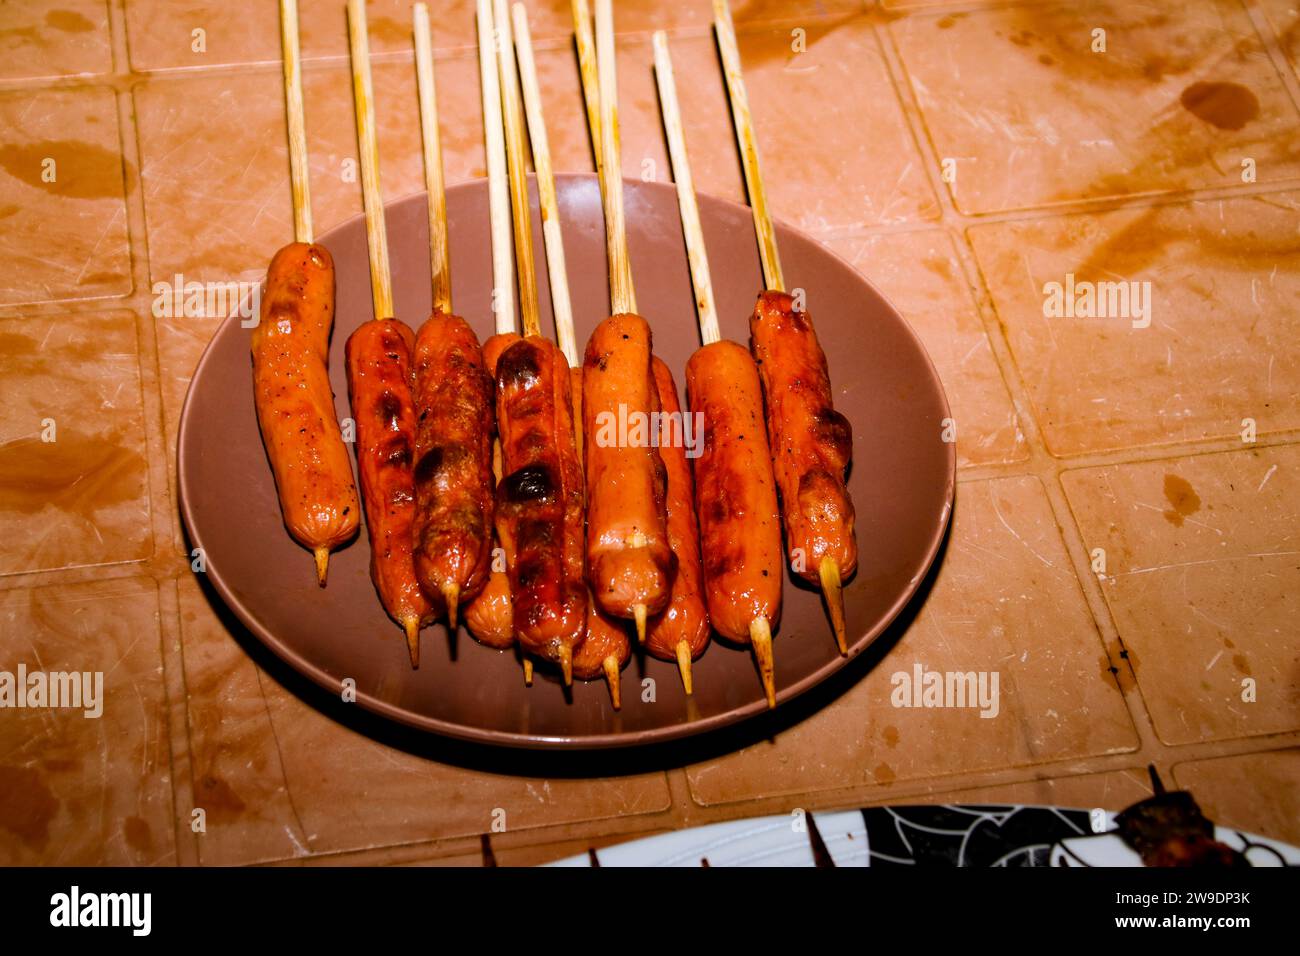 Collection of raw sausages to be grilled, grilled sausages on a food stand. stick sausages Stock Photo